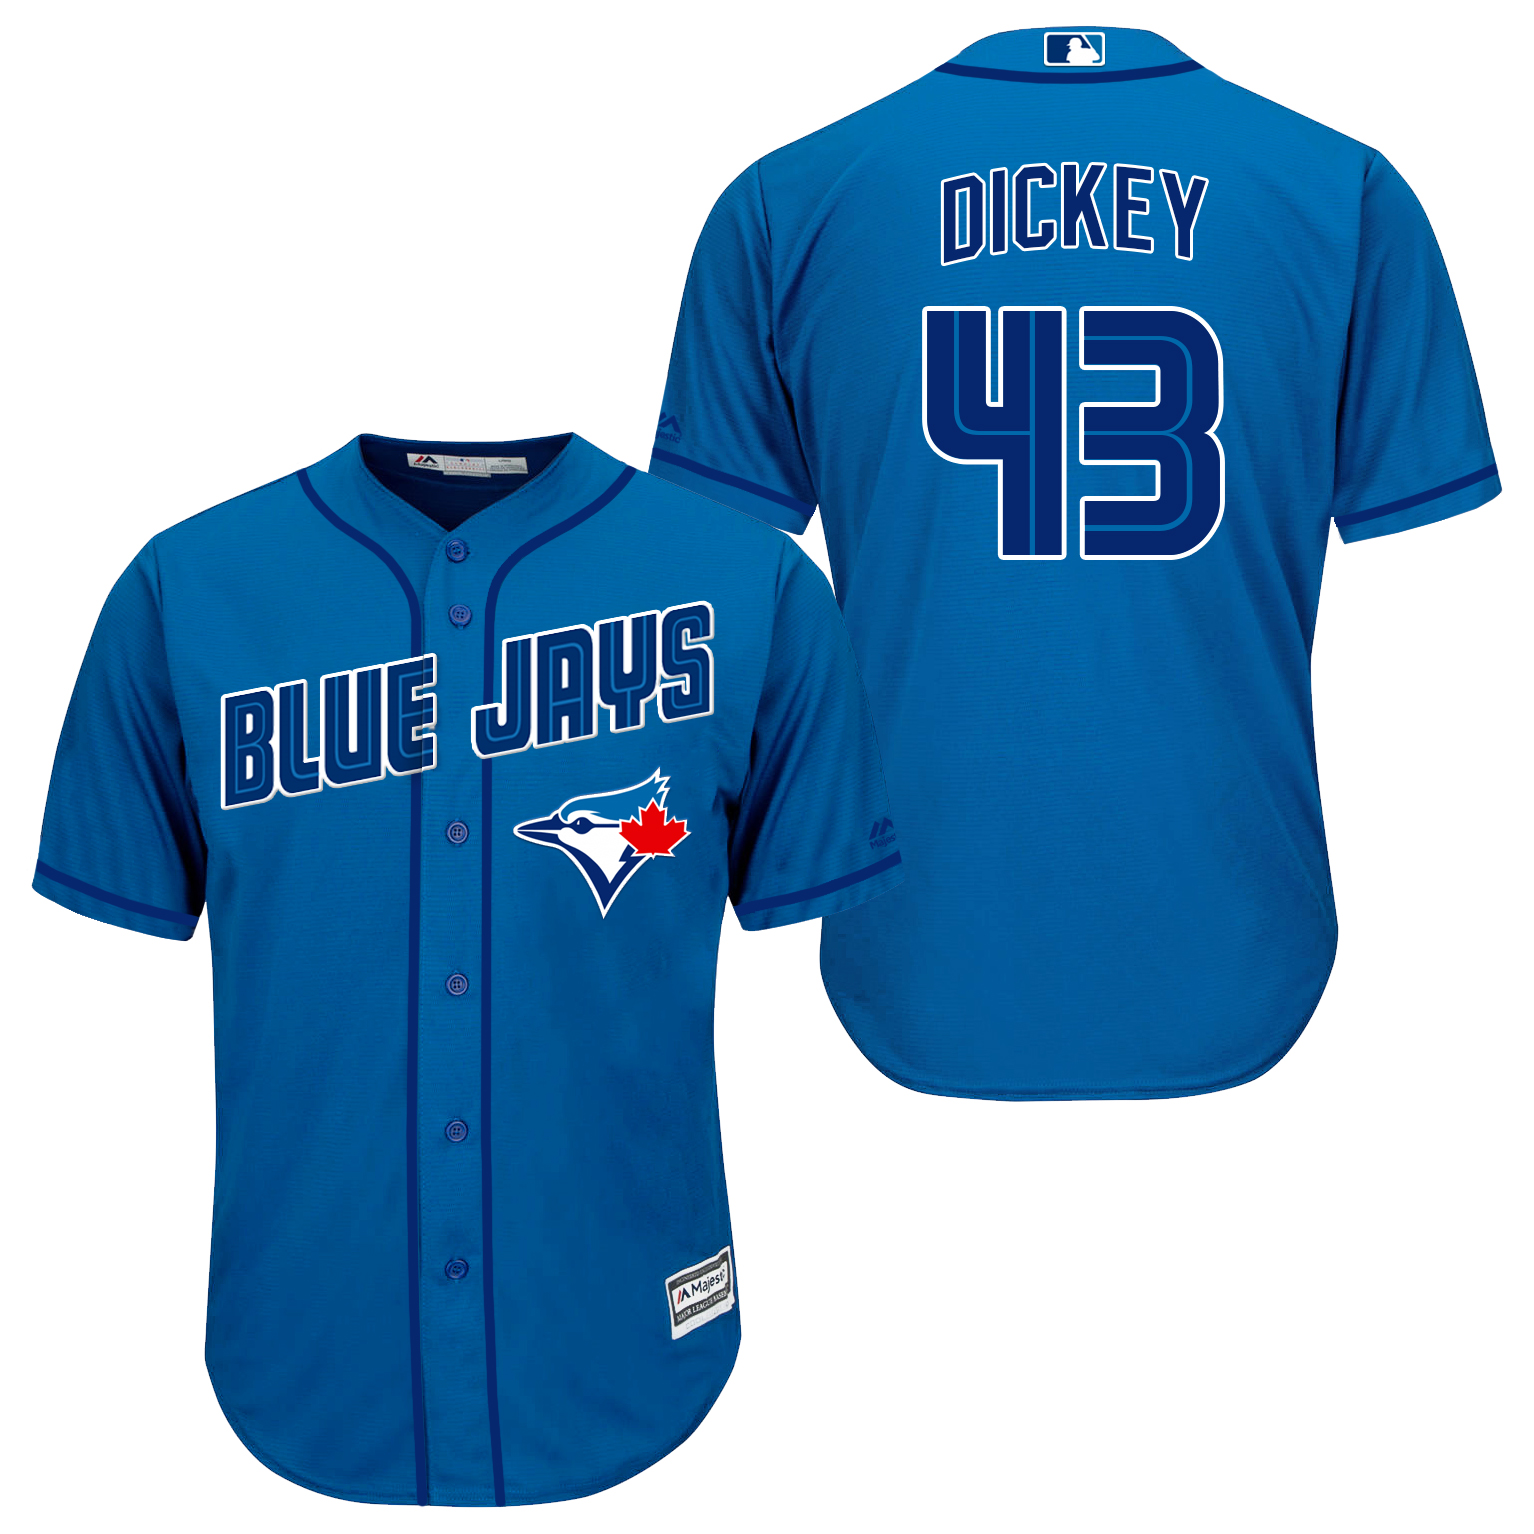 Blue Jays 43 R.A. Dickey Light Blue New Cool Base Jersey